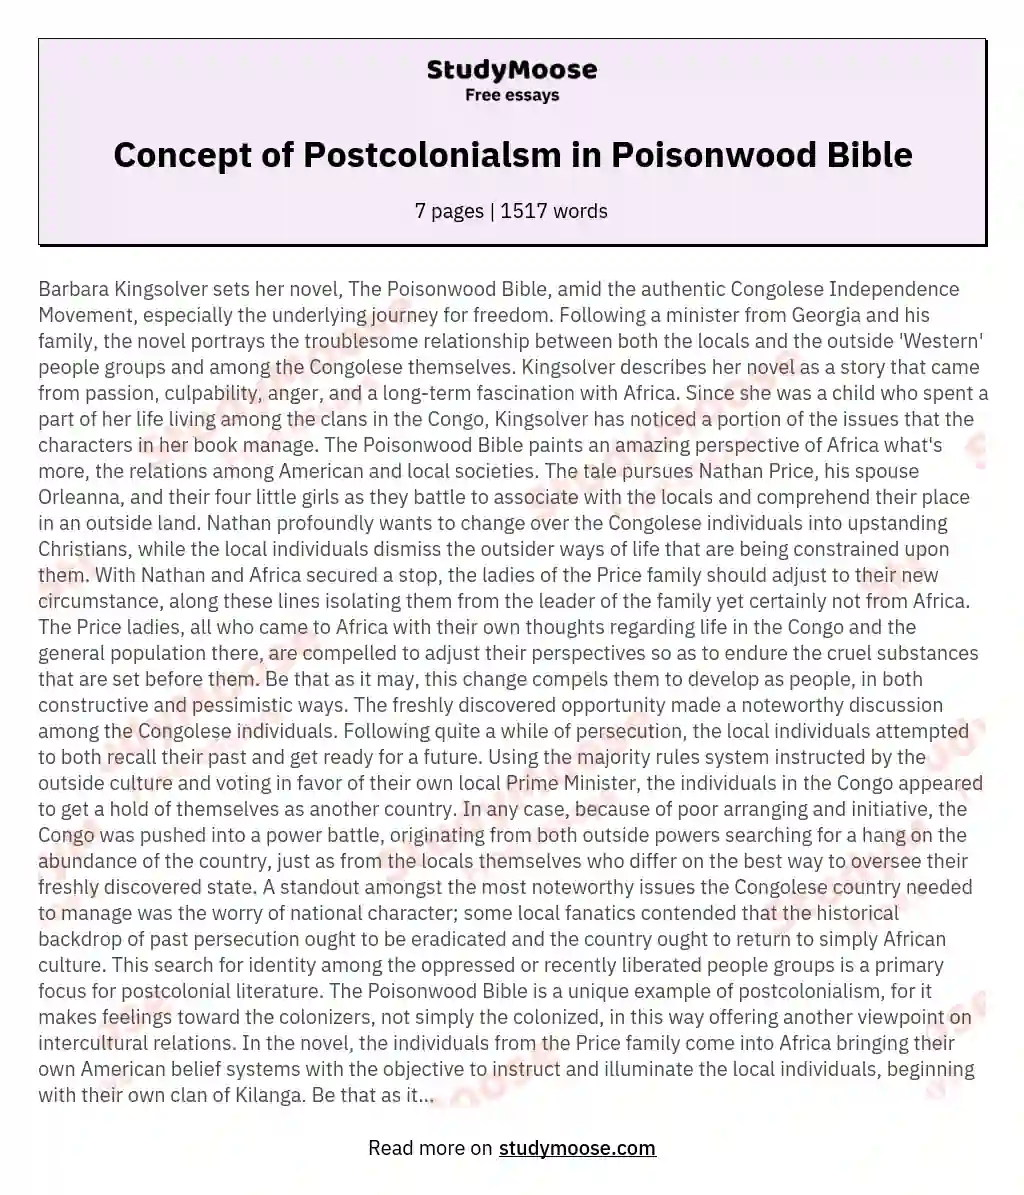 Concept of Postcolonialsm in Poisonwood Bible essay